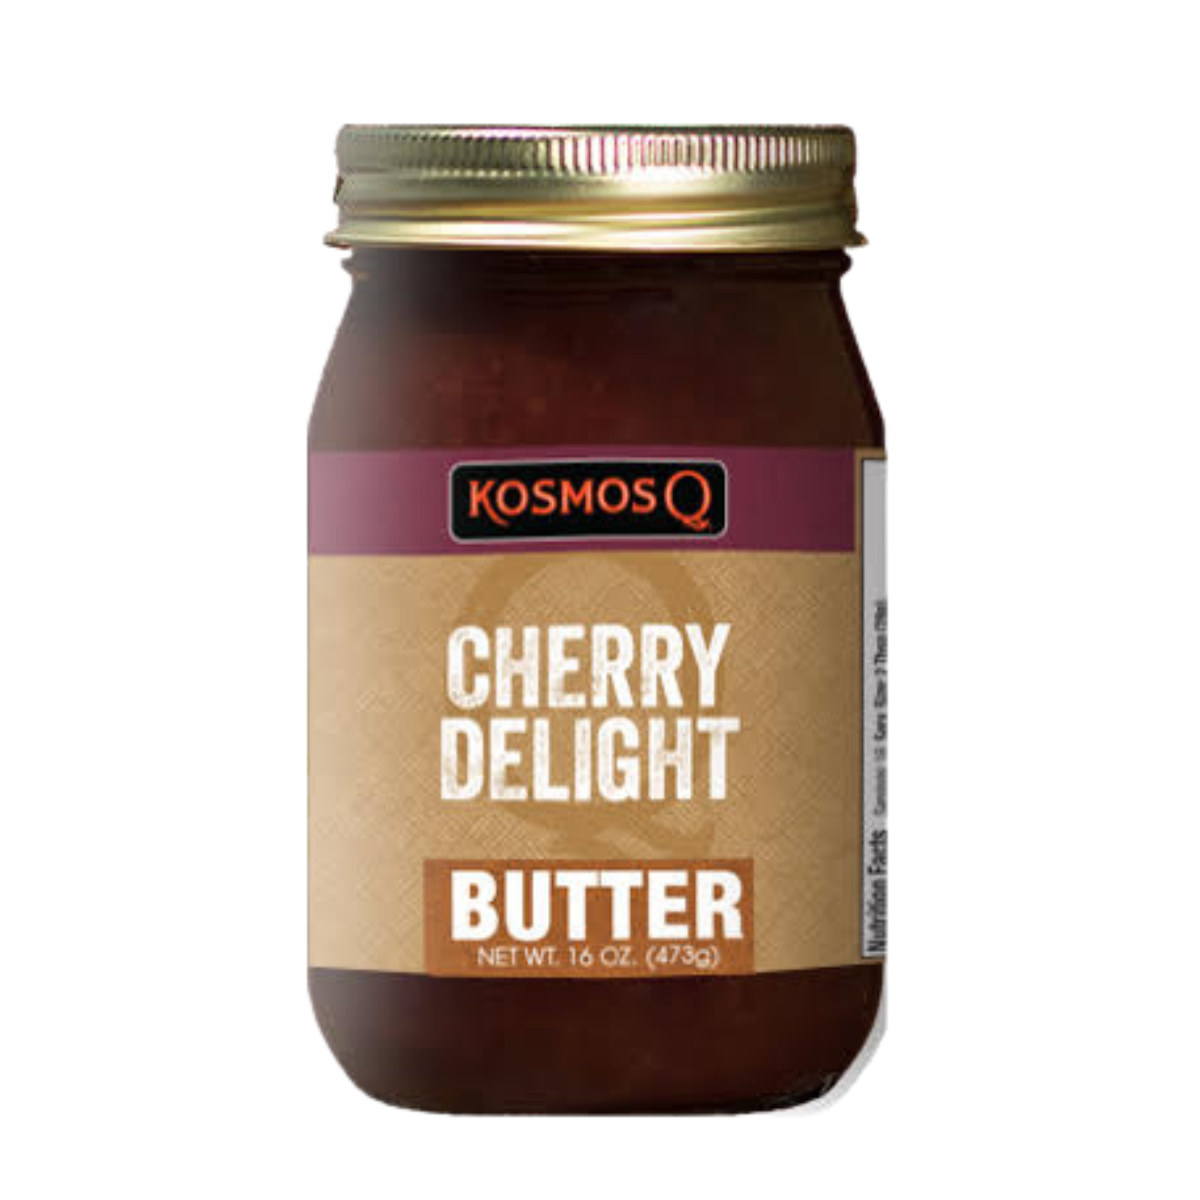 Kosmos Q BBQ Products & Supplies Cherry Butter Delight